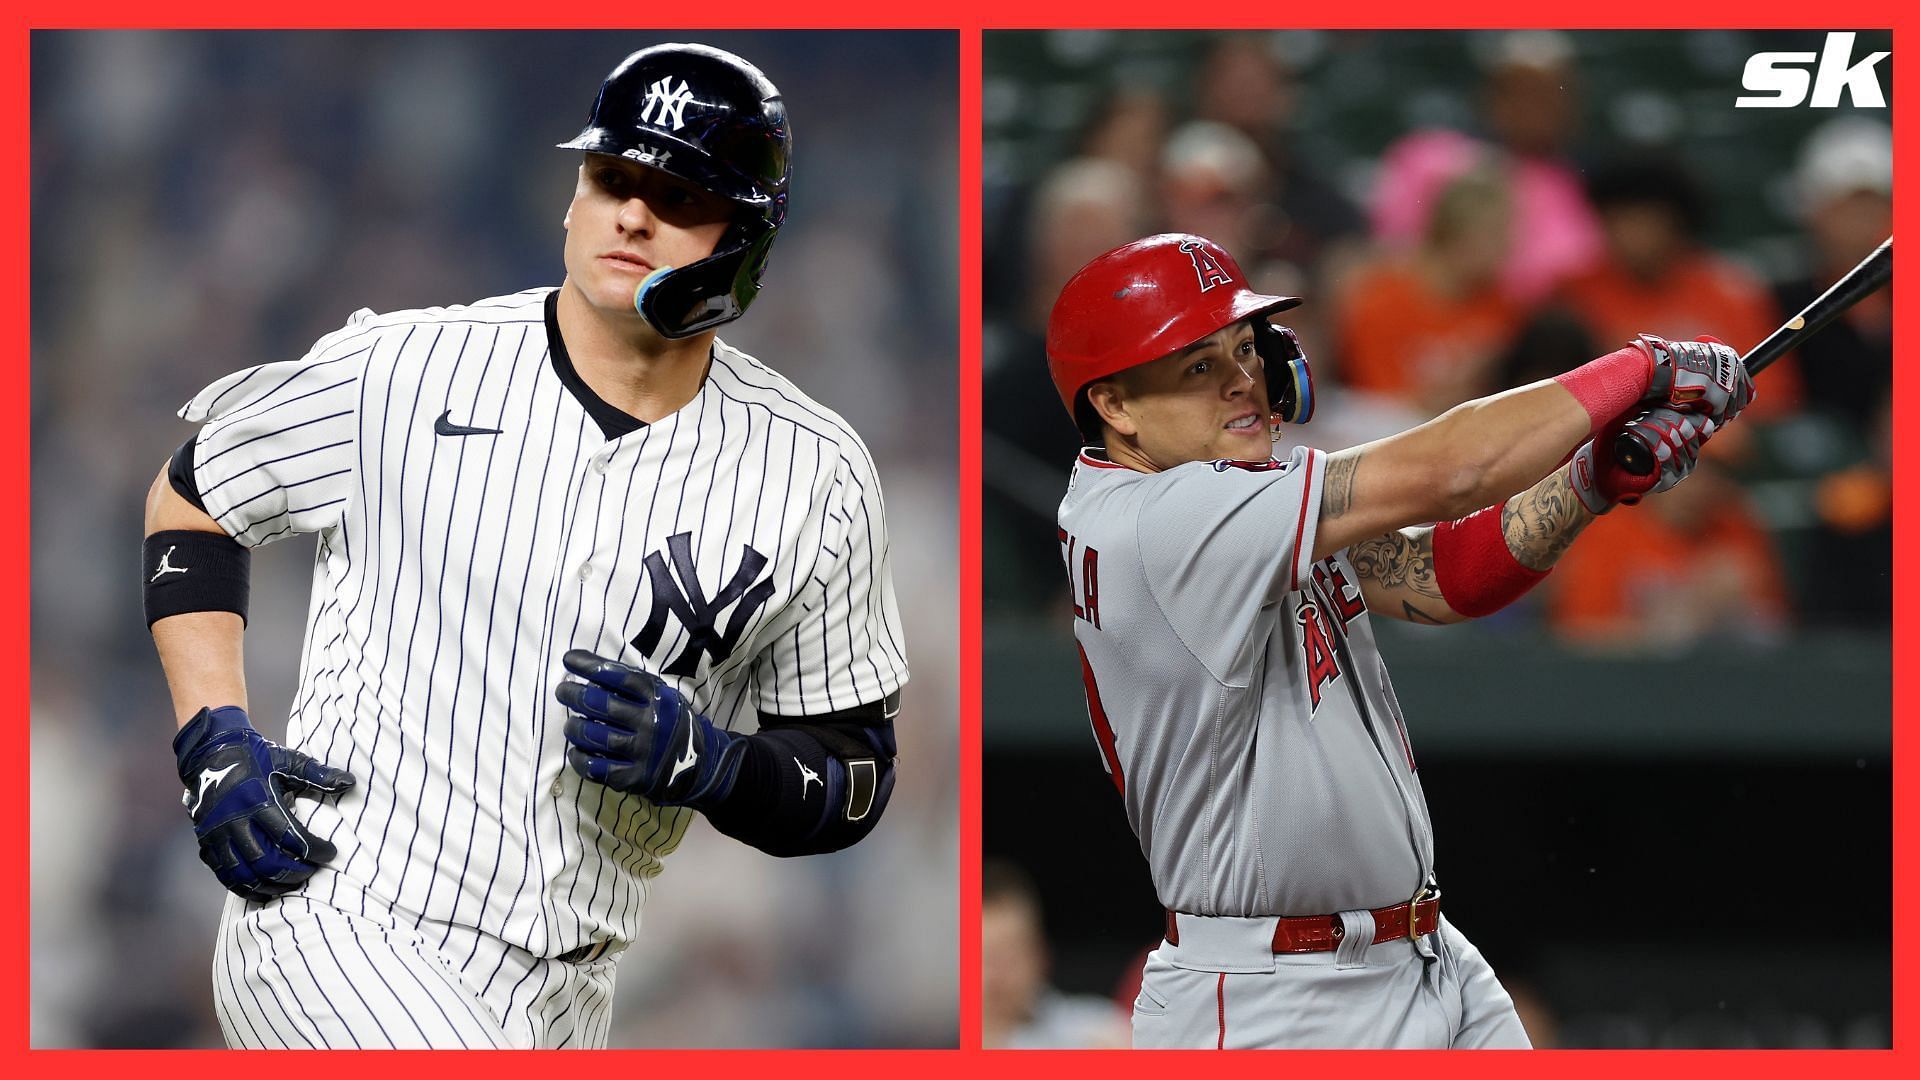 The Yankees traded Josh Donaldson for Gio Urshela in 2022 - how is that deal looking now?